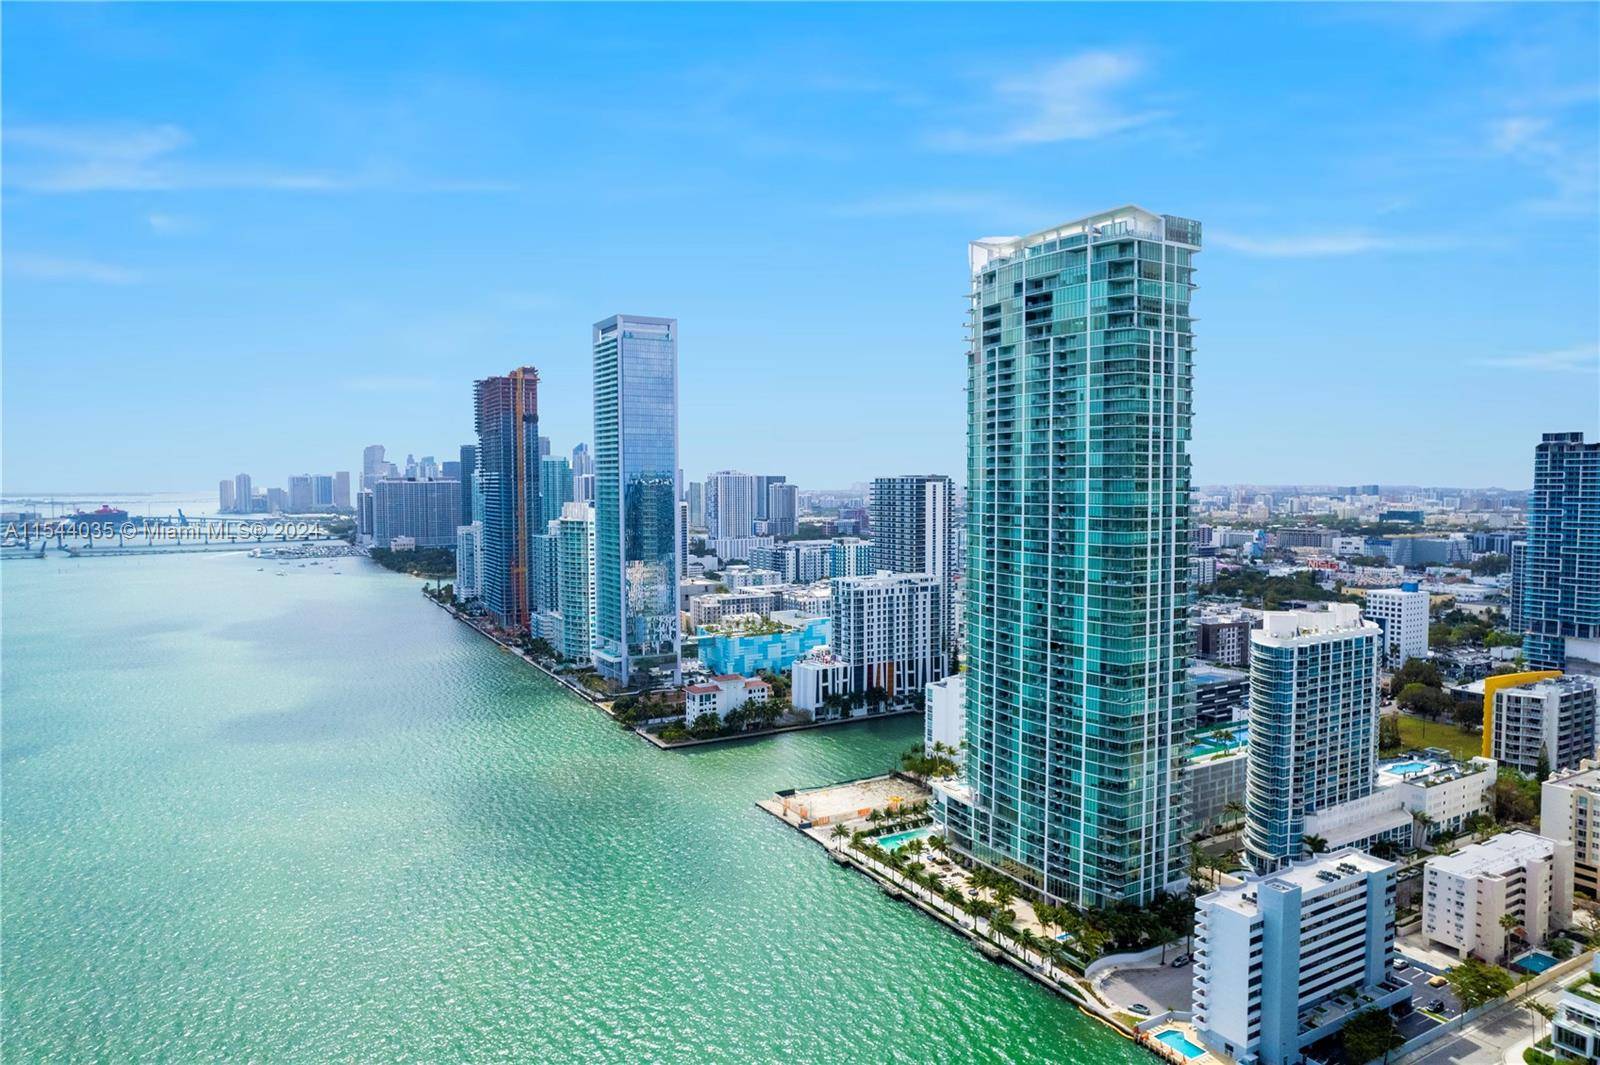 Welcome to Biscayne Beach, the star of Edgewater.